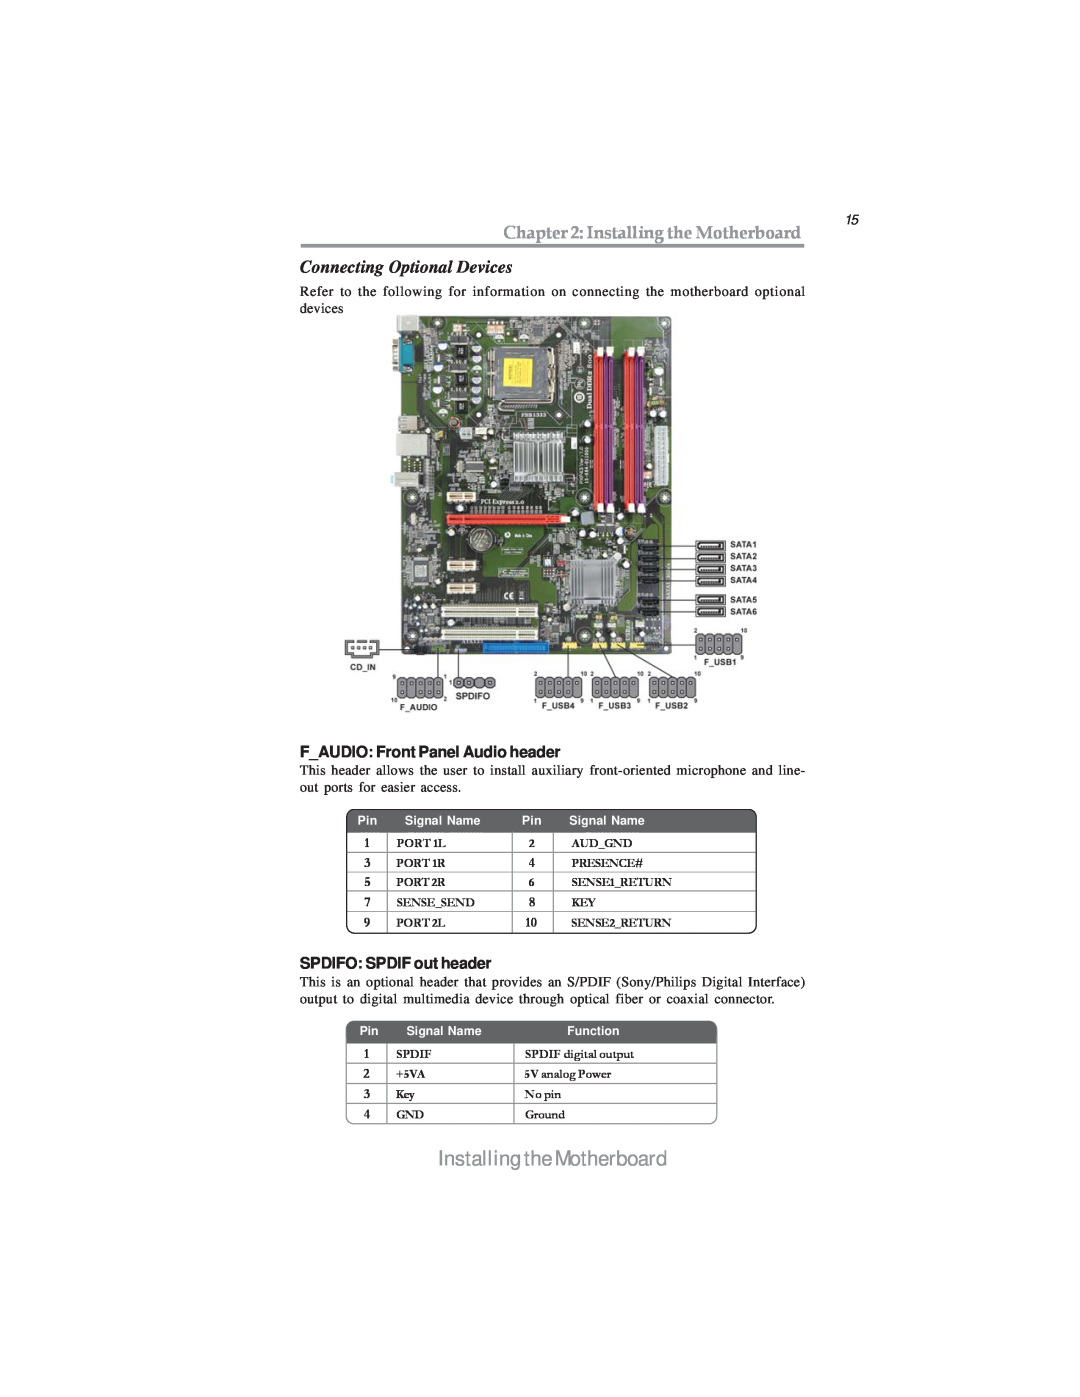 Microsoft PXP43 manual Connecting Optional Devices, Installing the Motherboard, FAUDIO Front Panel Audio header 